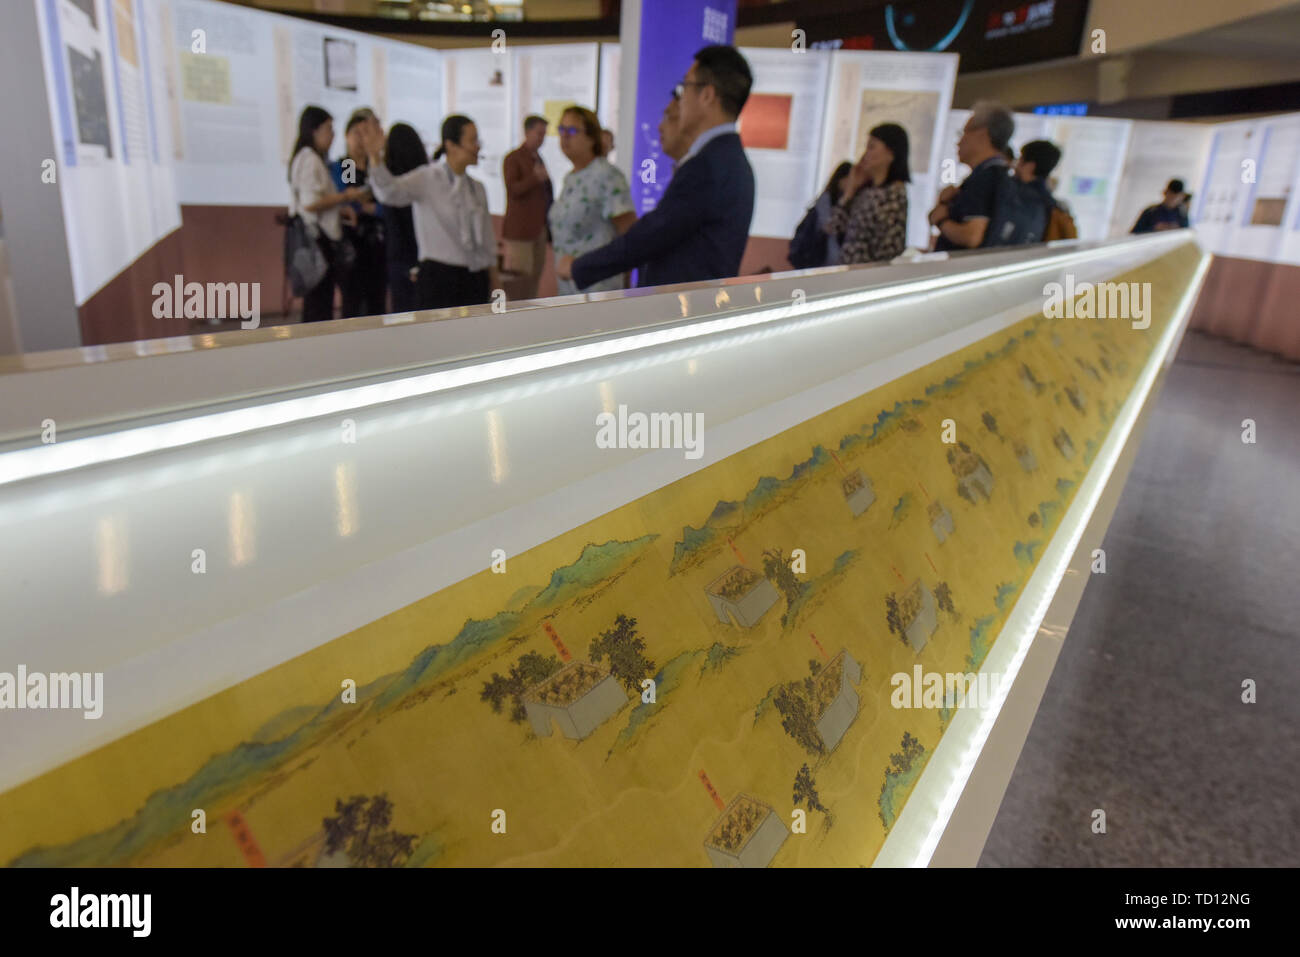 Vienna, Austria. 11th June, 2019. People visit the Chinese navigation exhibition 'From Compass to BeiDou' in Vienna, Austria, on June 11, 2019. A Chinese navigation exhibition opens in Vienna International Center on Tuesday, showing how the nation evolves 'from compass to BeiDou' - as the exhibition is themed - in time service, surveying, mapping and navigation technologies. Credit: Guo Chen/Xinhua/Alamy Live News Stock Photo